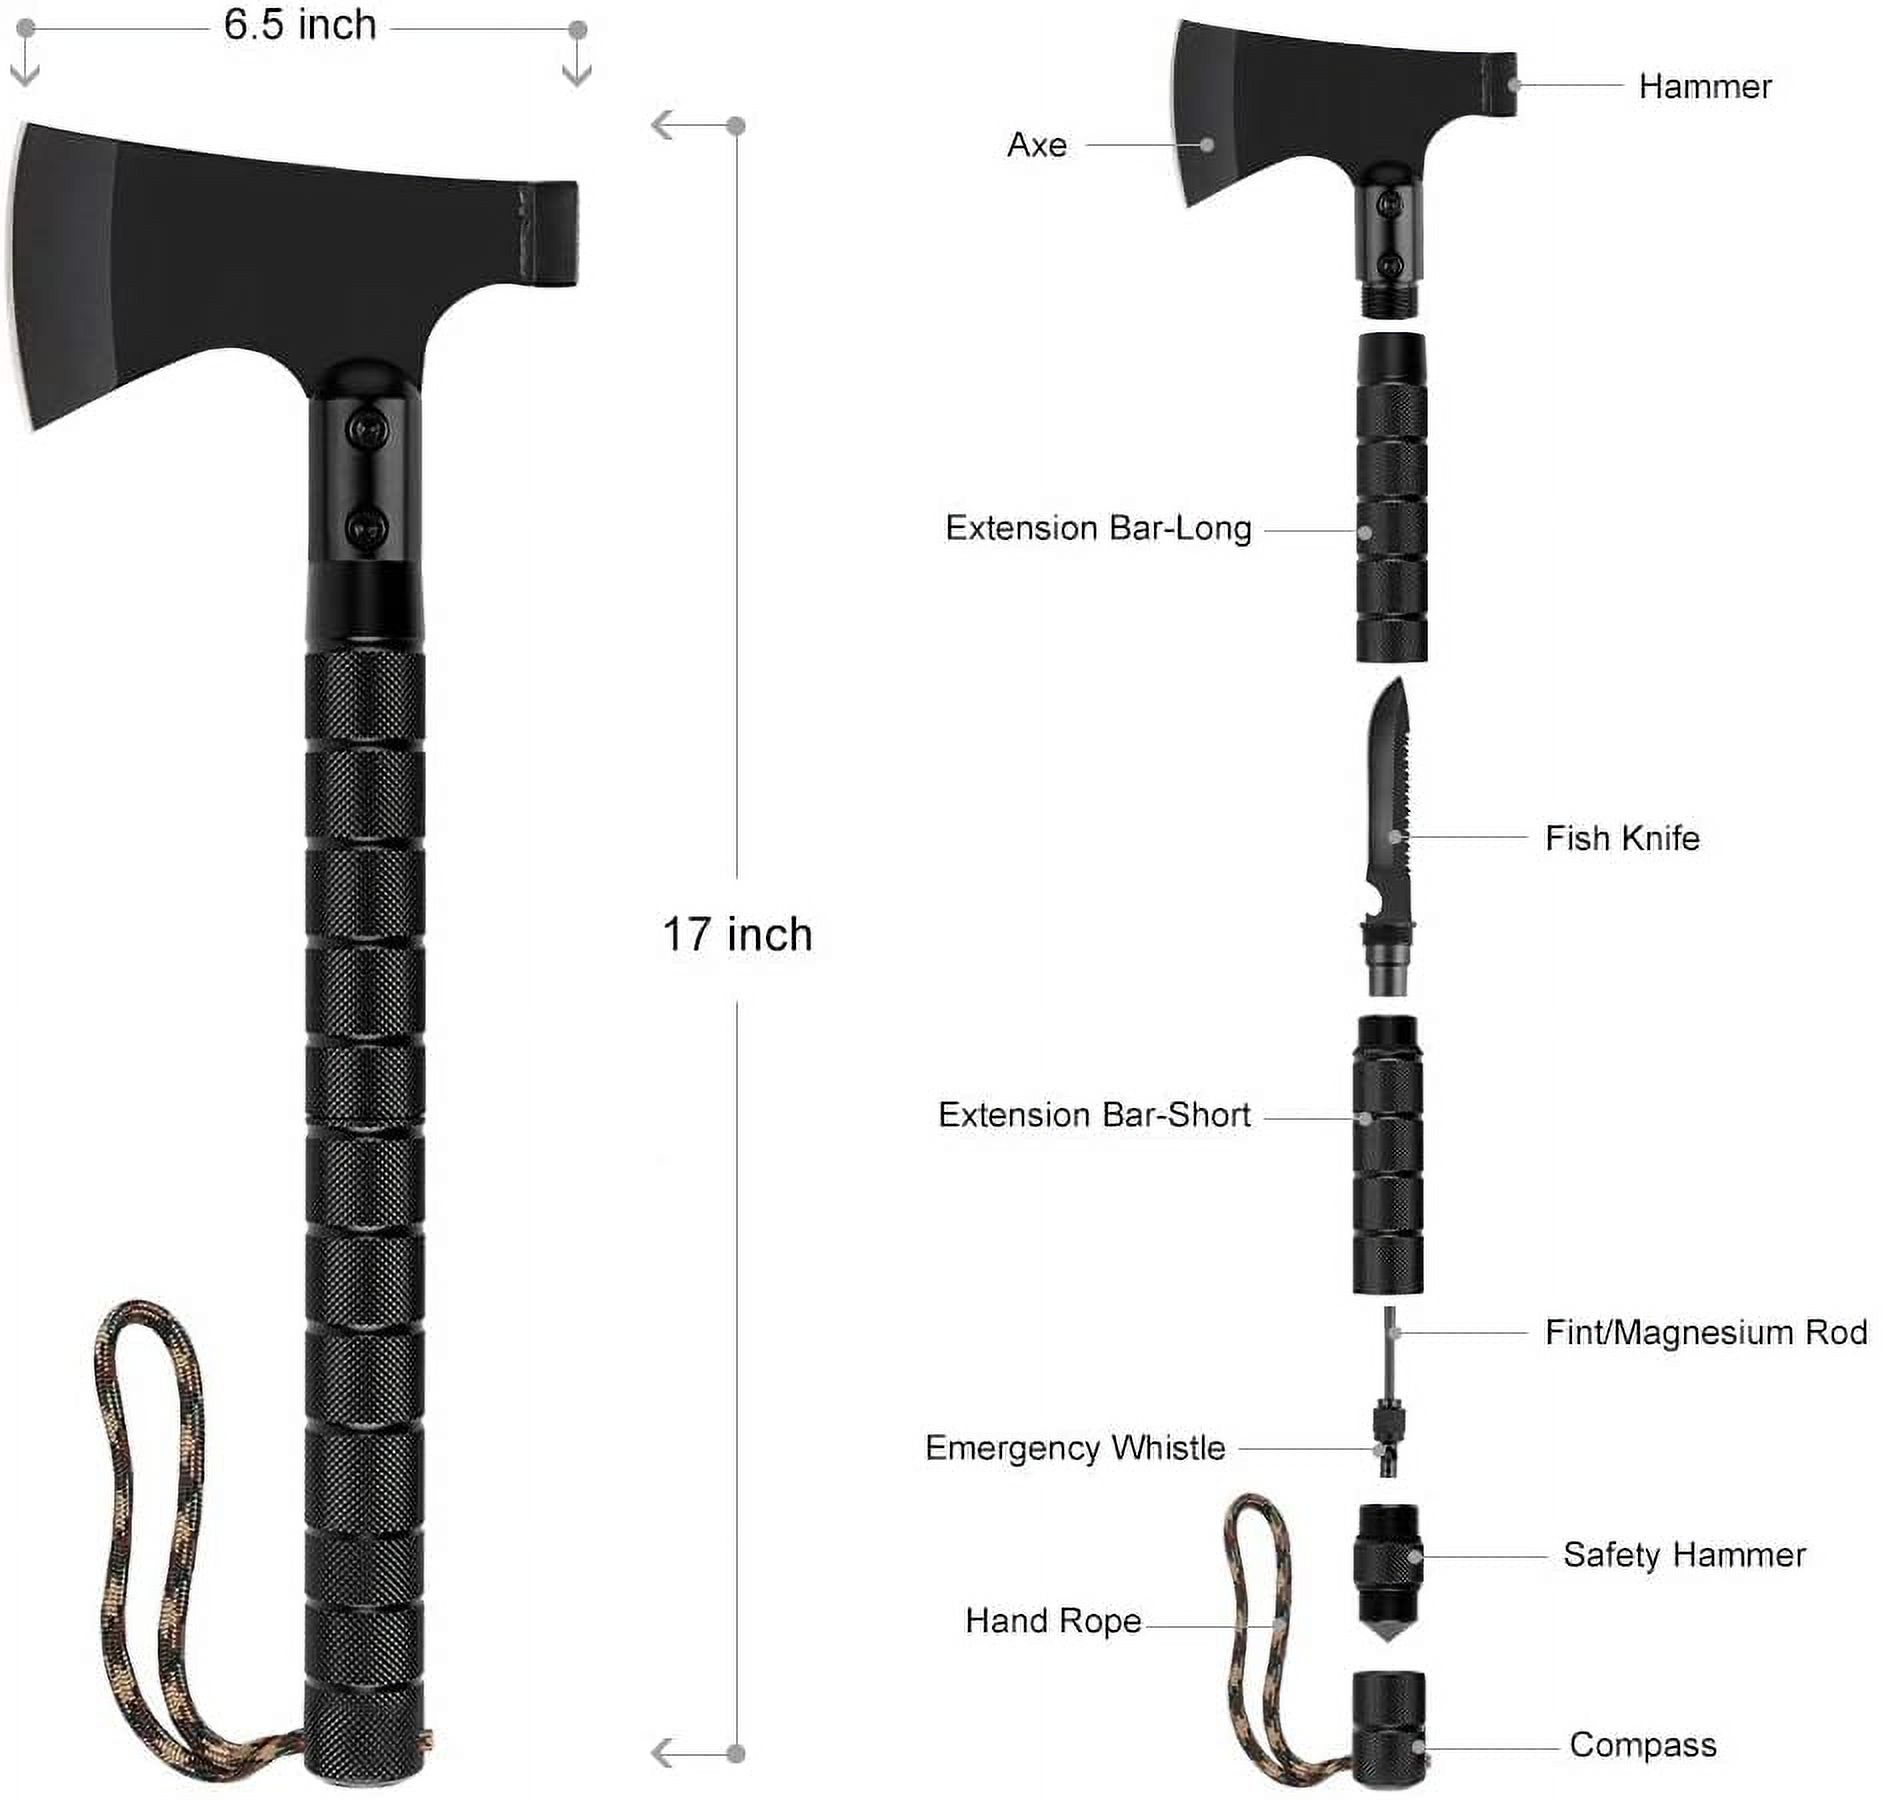 Survival Axe Portable Camping Axe Multi-Tool Hatchet Survival Kit - image 2 of 7